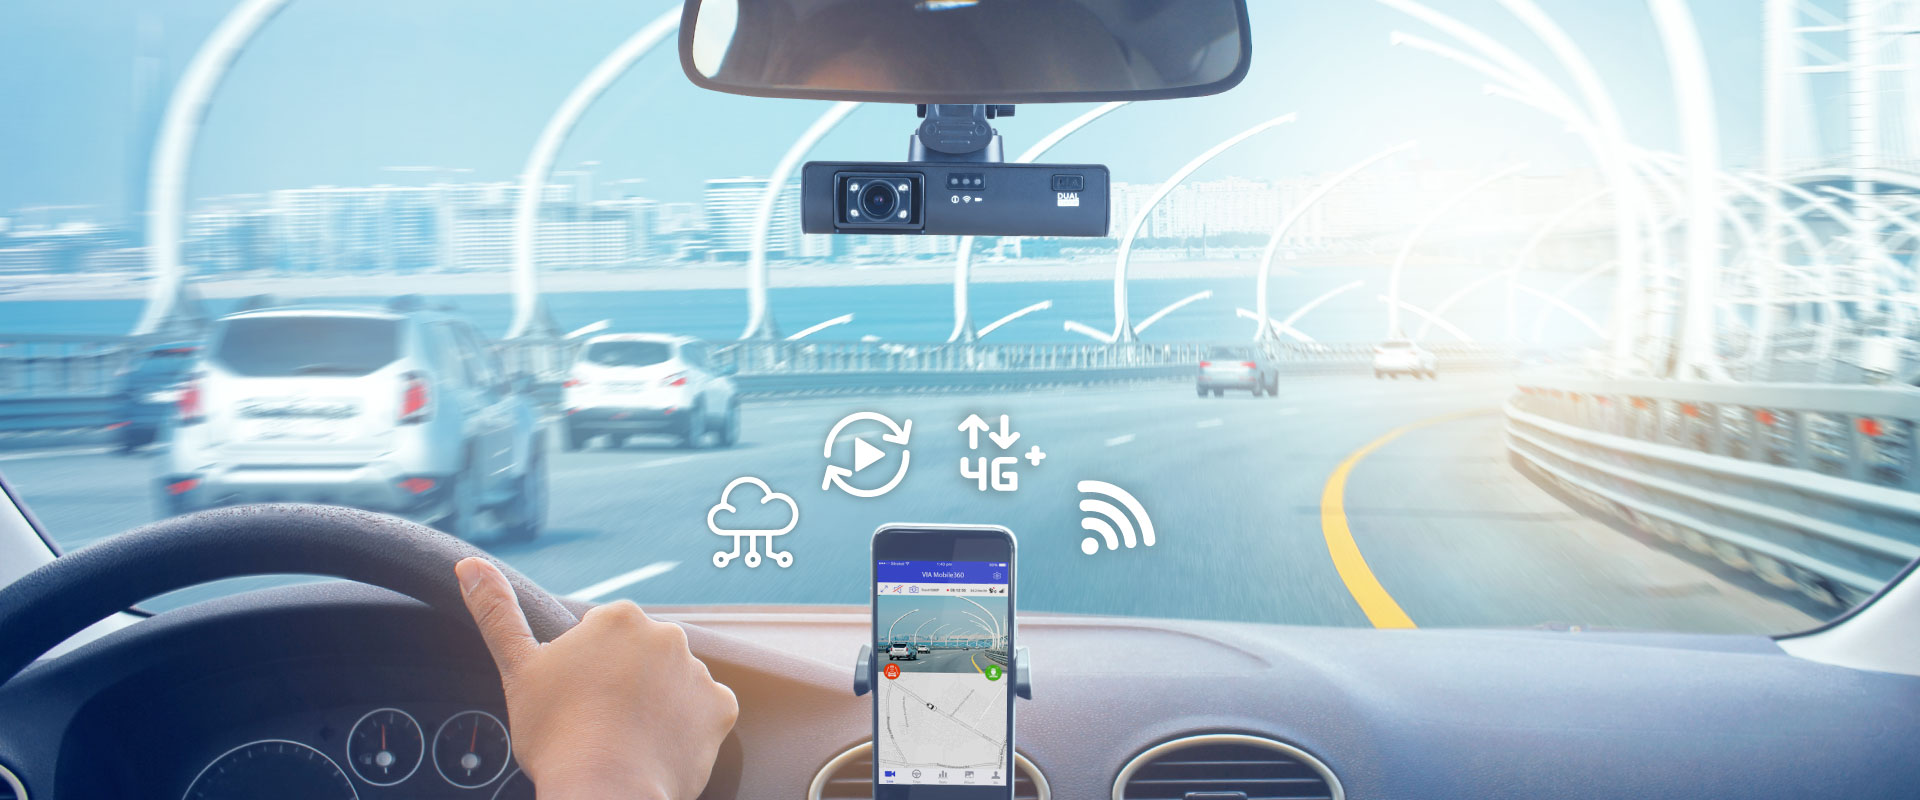 VIA Mobile360 D700 AI Dash Cam Granted IoT Network Approval by T-Mobile